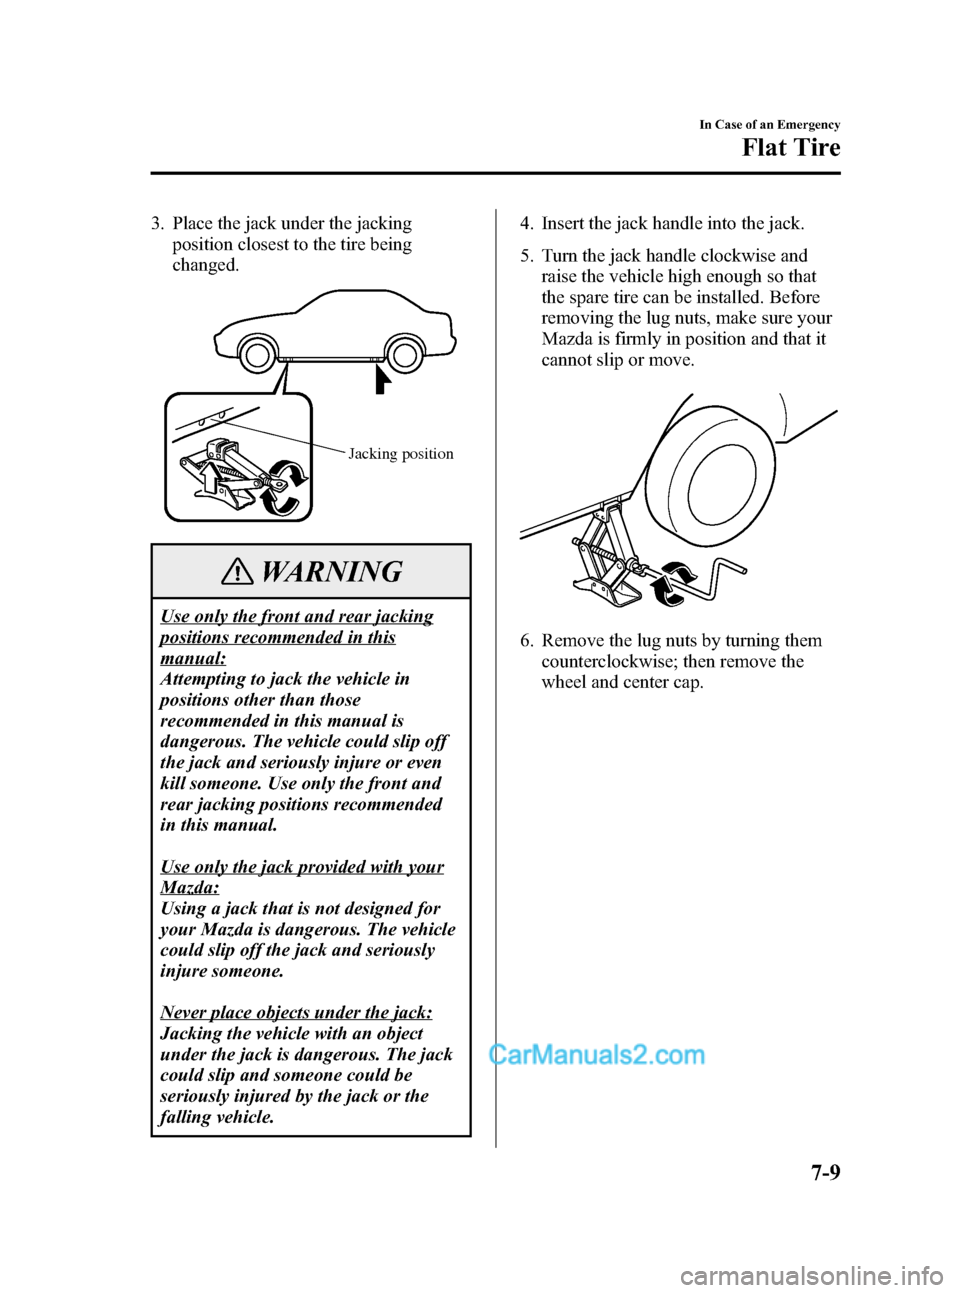 MAZDA MODEL MAZDASPEED 3 2007  Owners Manual (in English) Black plate (261,1)
3. Place the jack under the jacking
position closest to the tire being
changed.
Jacking position
WARNING
Use only the front and rear jacking
positions recommended in this
manual:
A